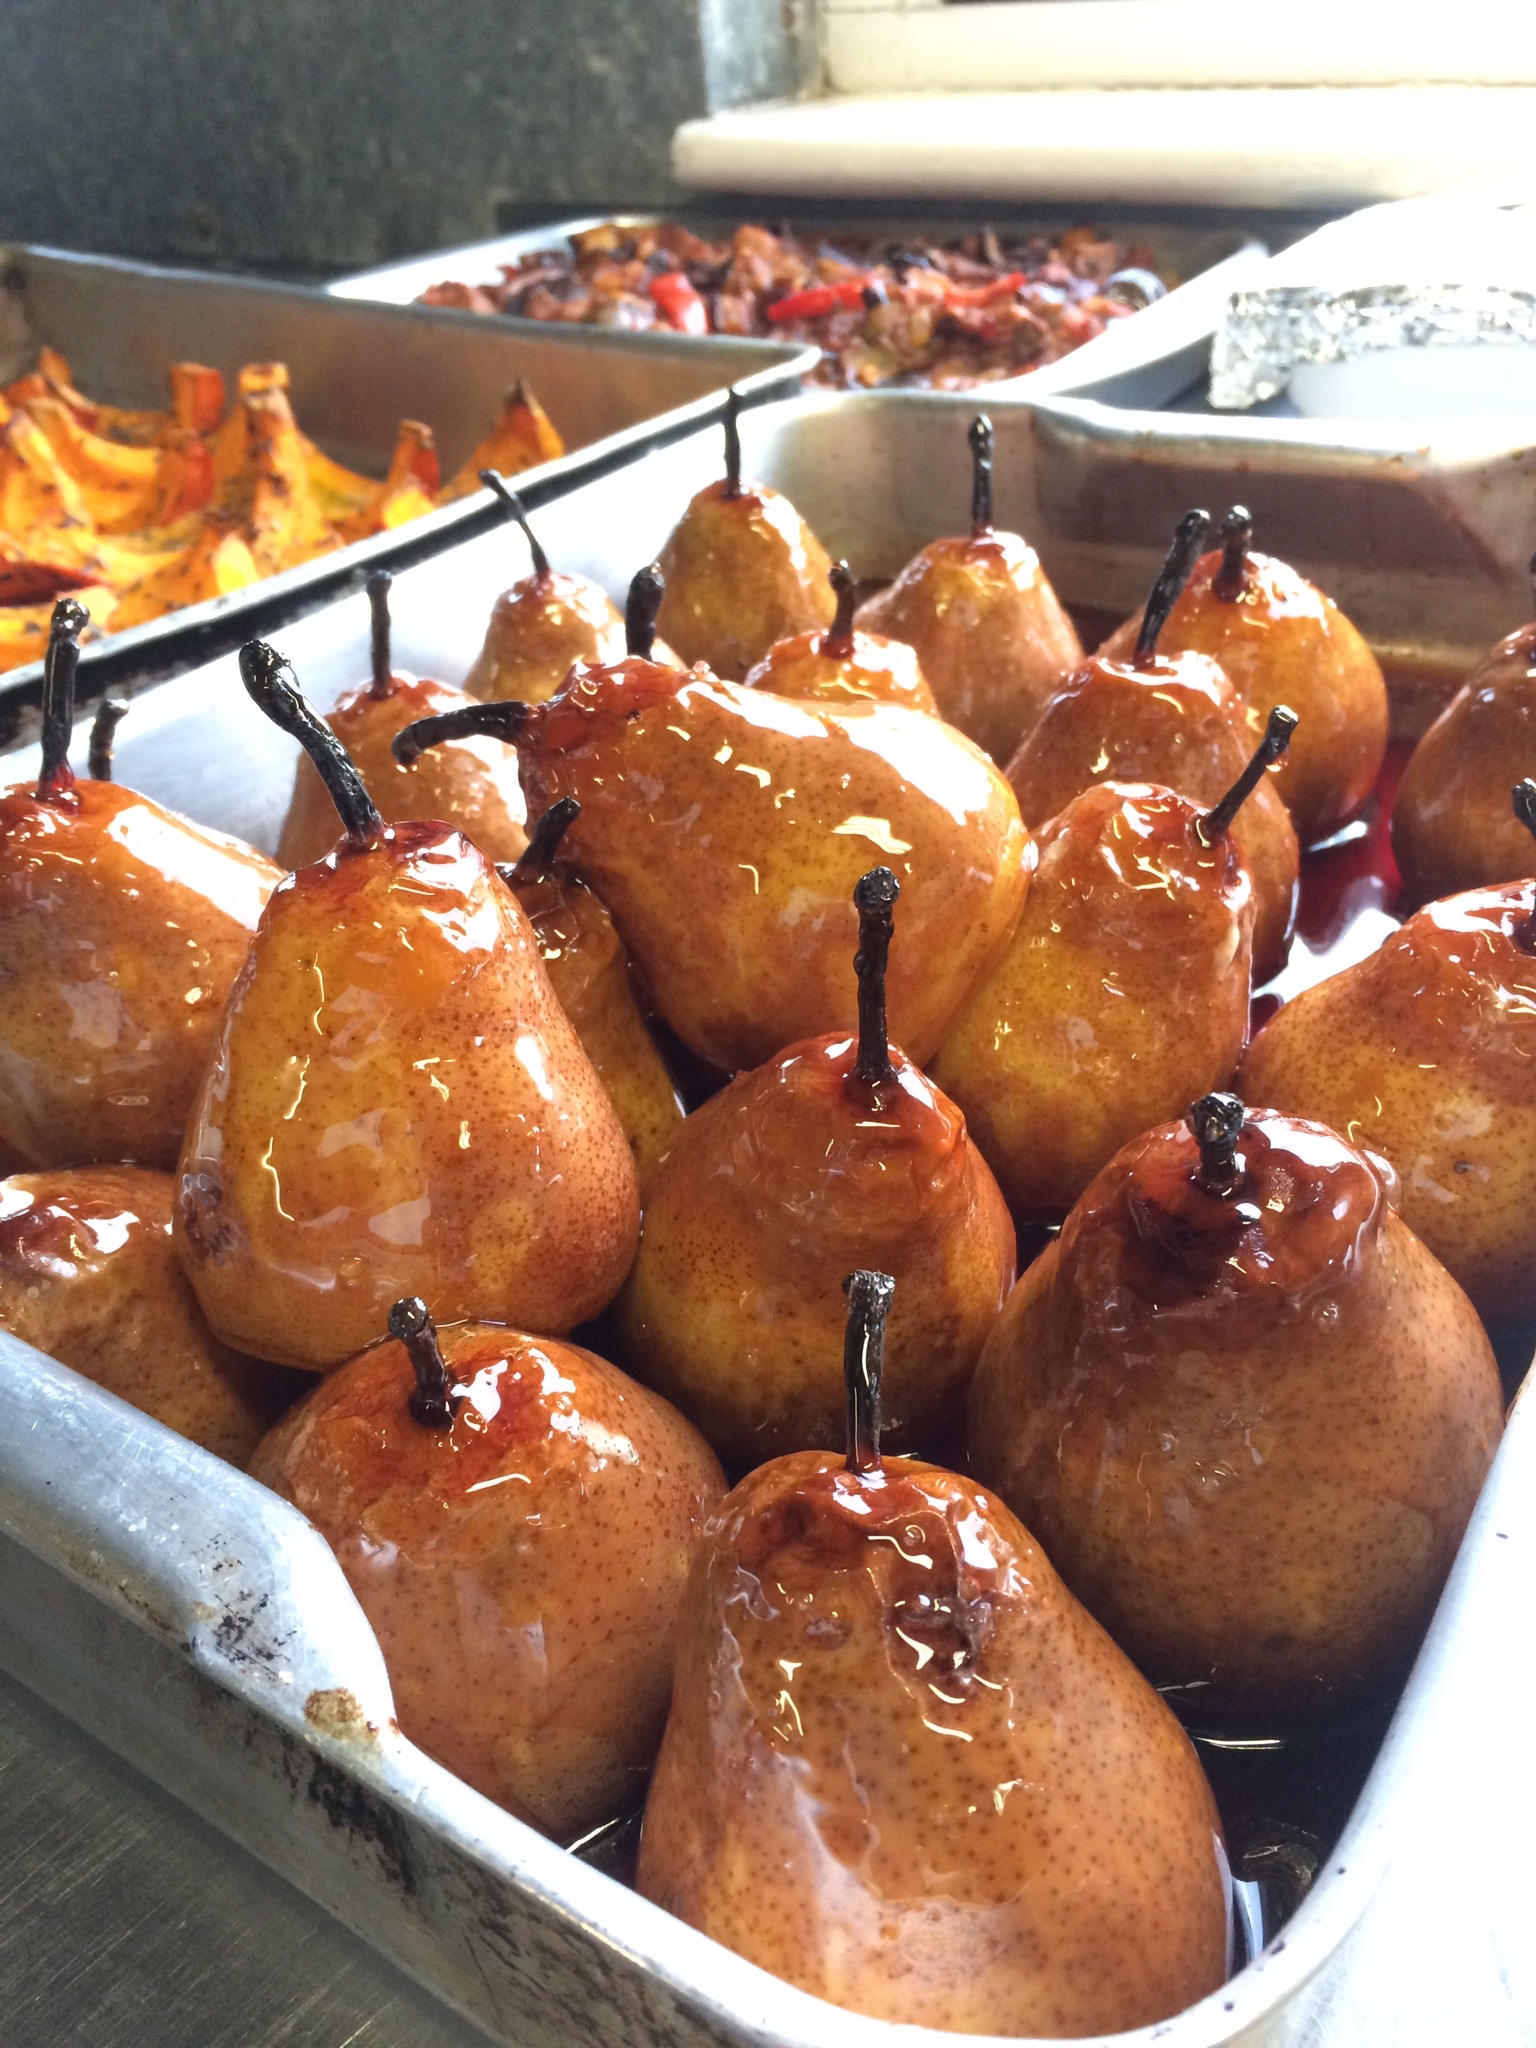 Pears in a roasting tin covered in red wine caramel sauce